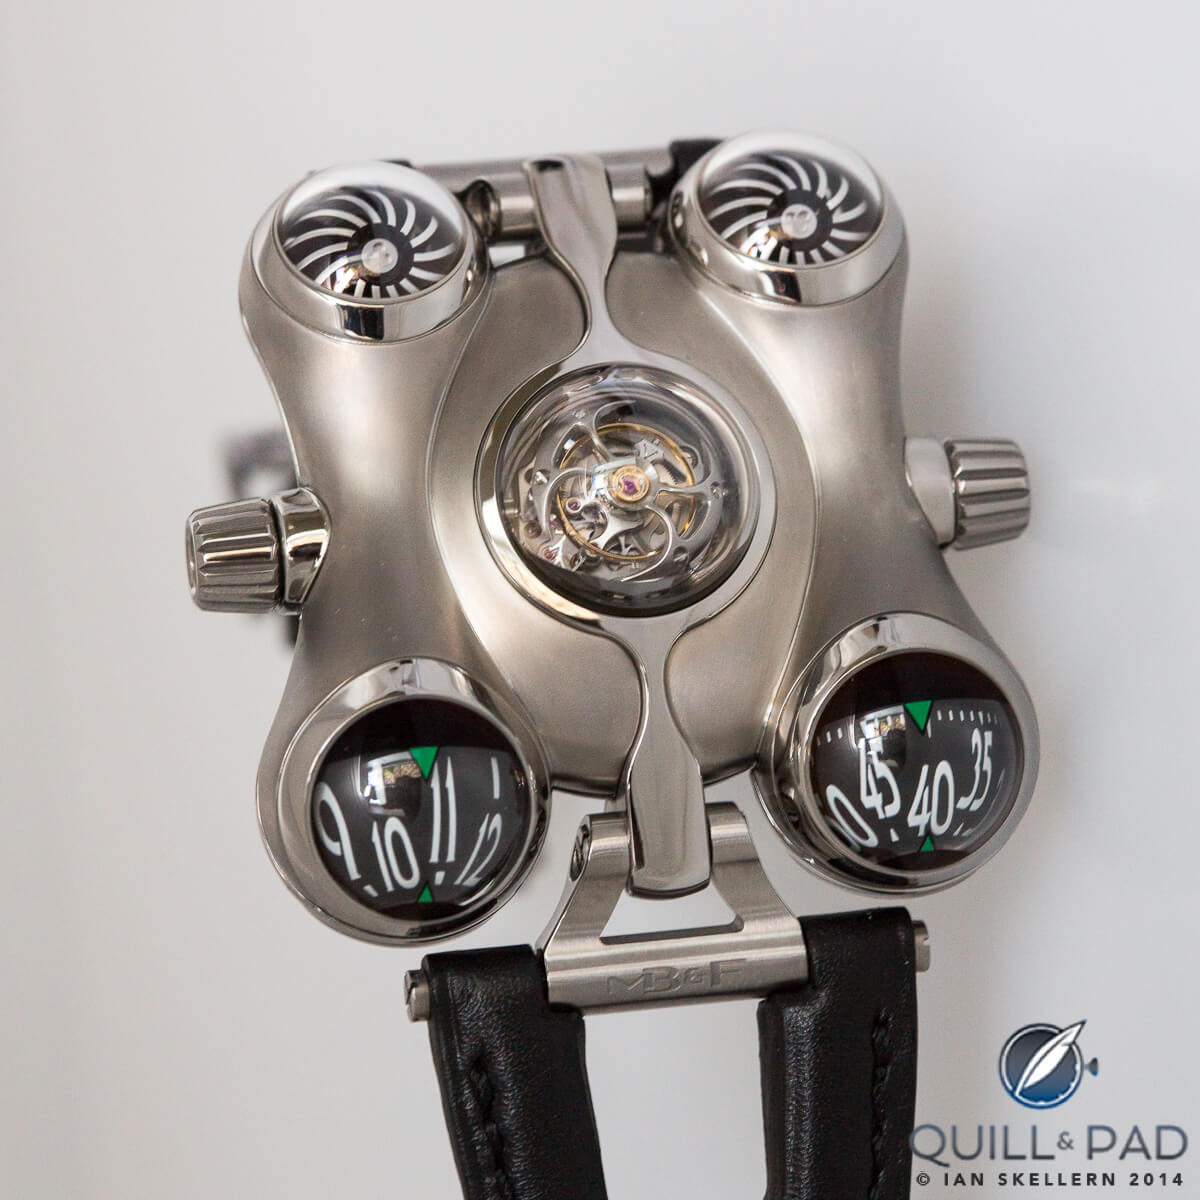 Horological Machine No.6 (HM6) by MB&F